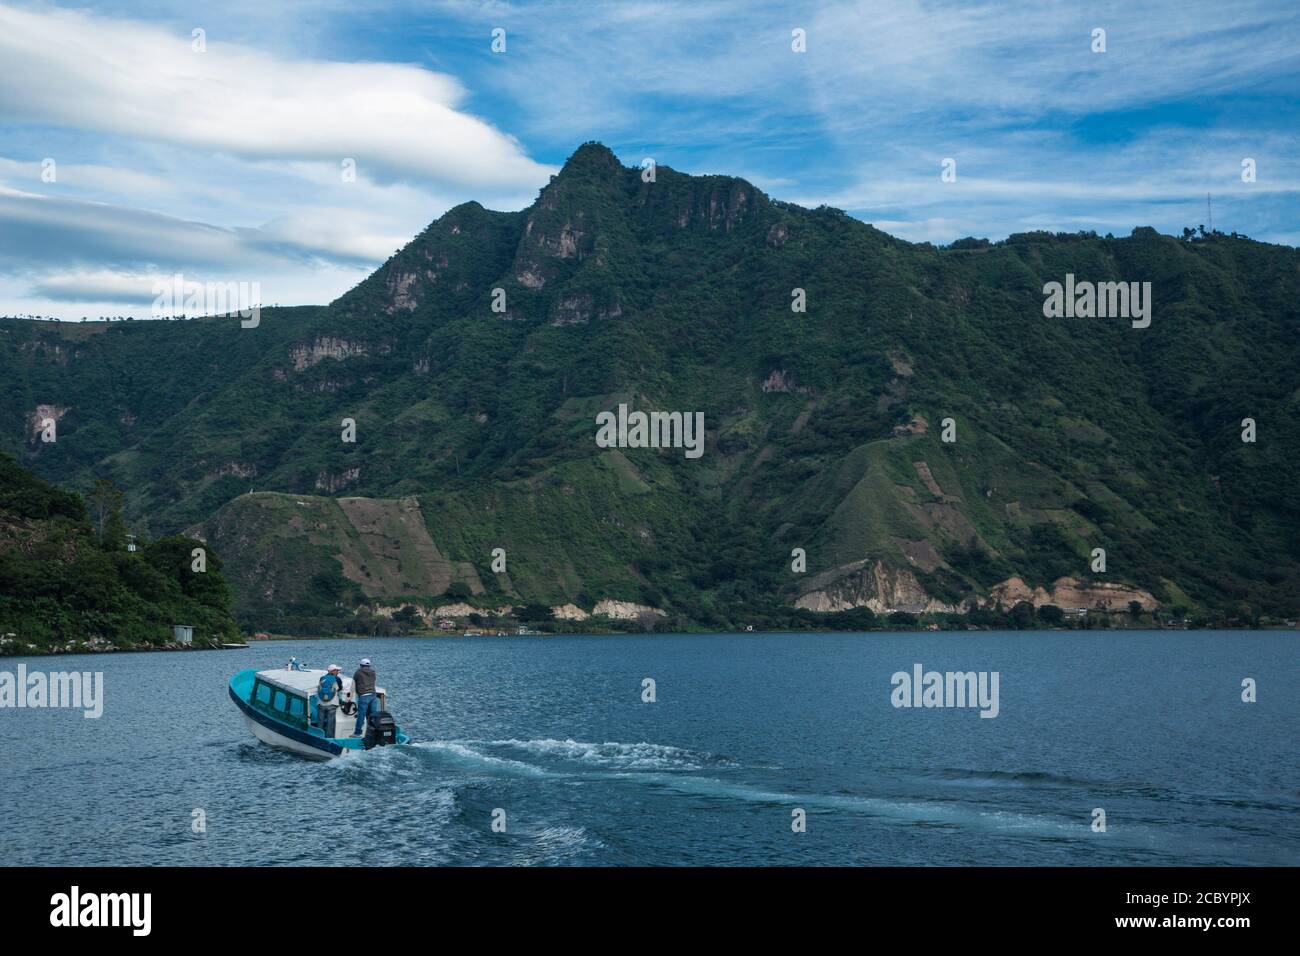 A view of the Nariz del Indio or the Indian's Nose as seen from San Pedro la Laguna on Lake Atitlan, Guatemala.  A boat taxi is in the foreground.  Th Stock Photo